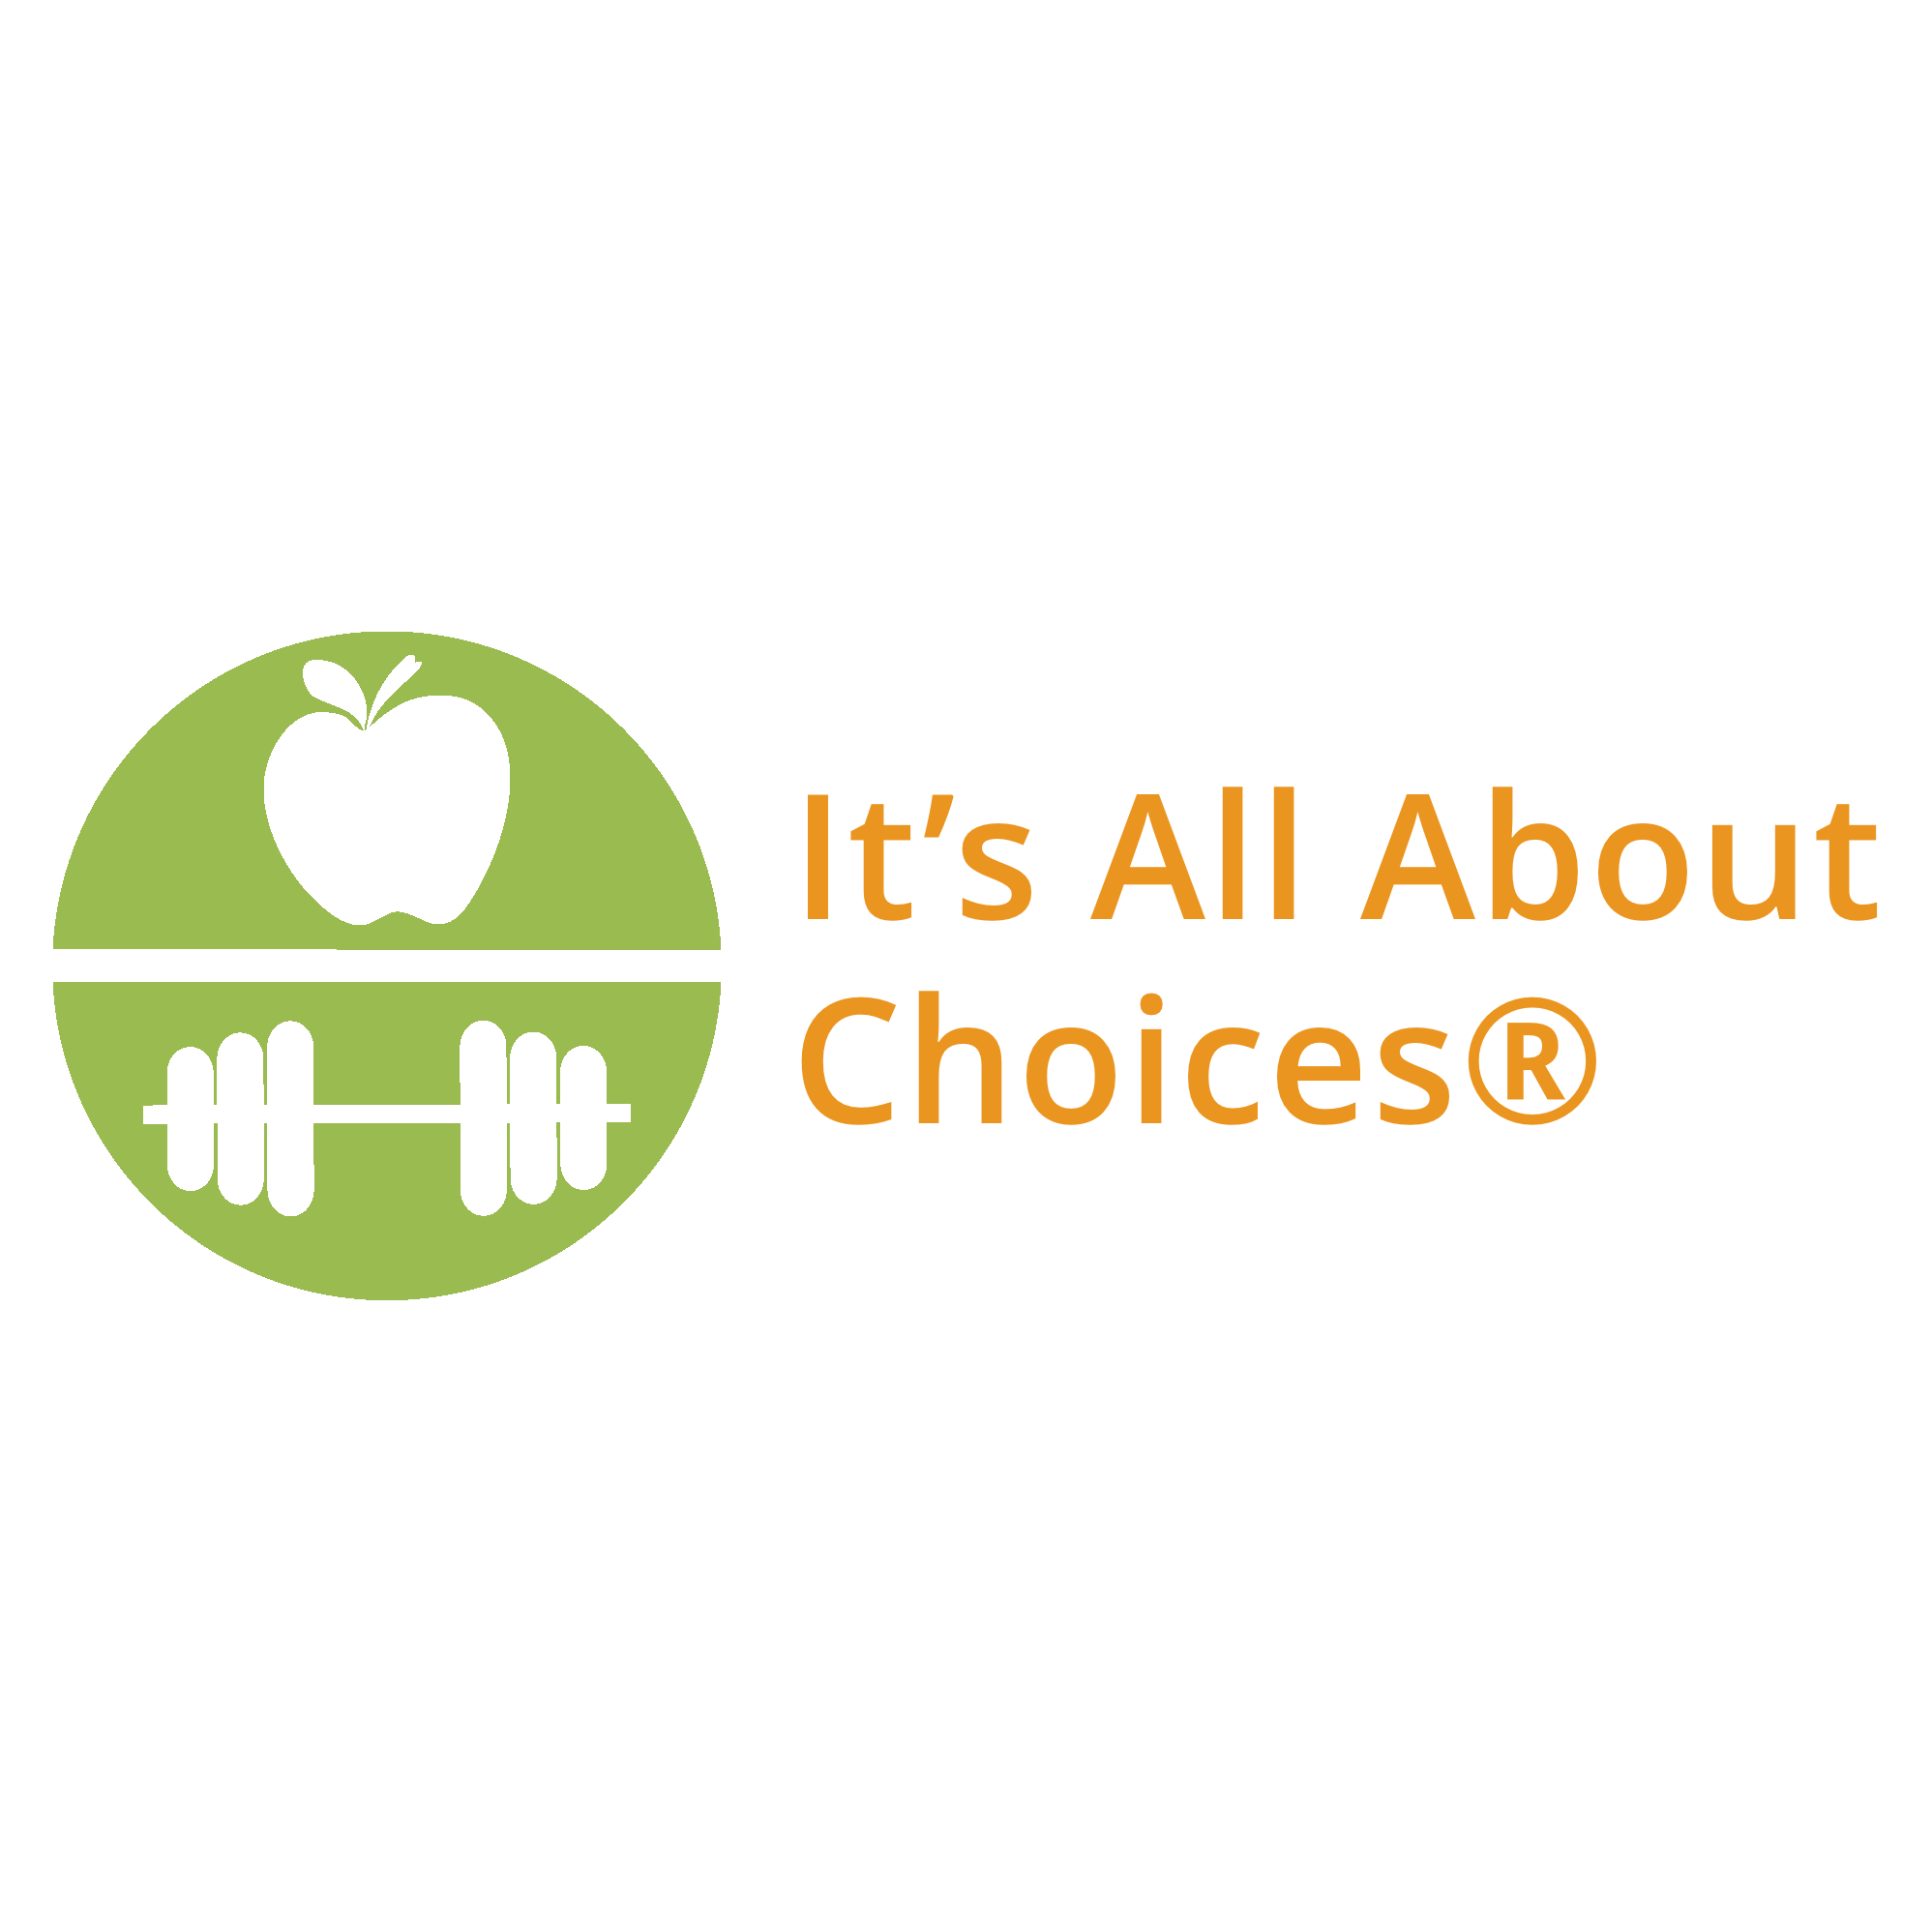 It's All About Choices - Nutrition & Weight Loss Logo